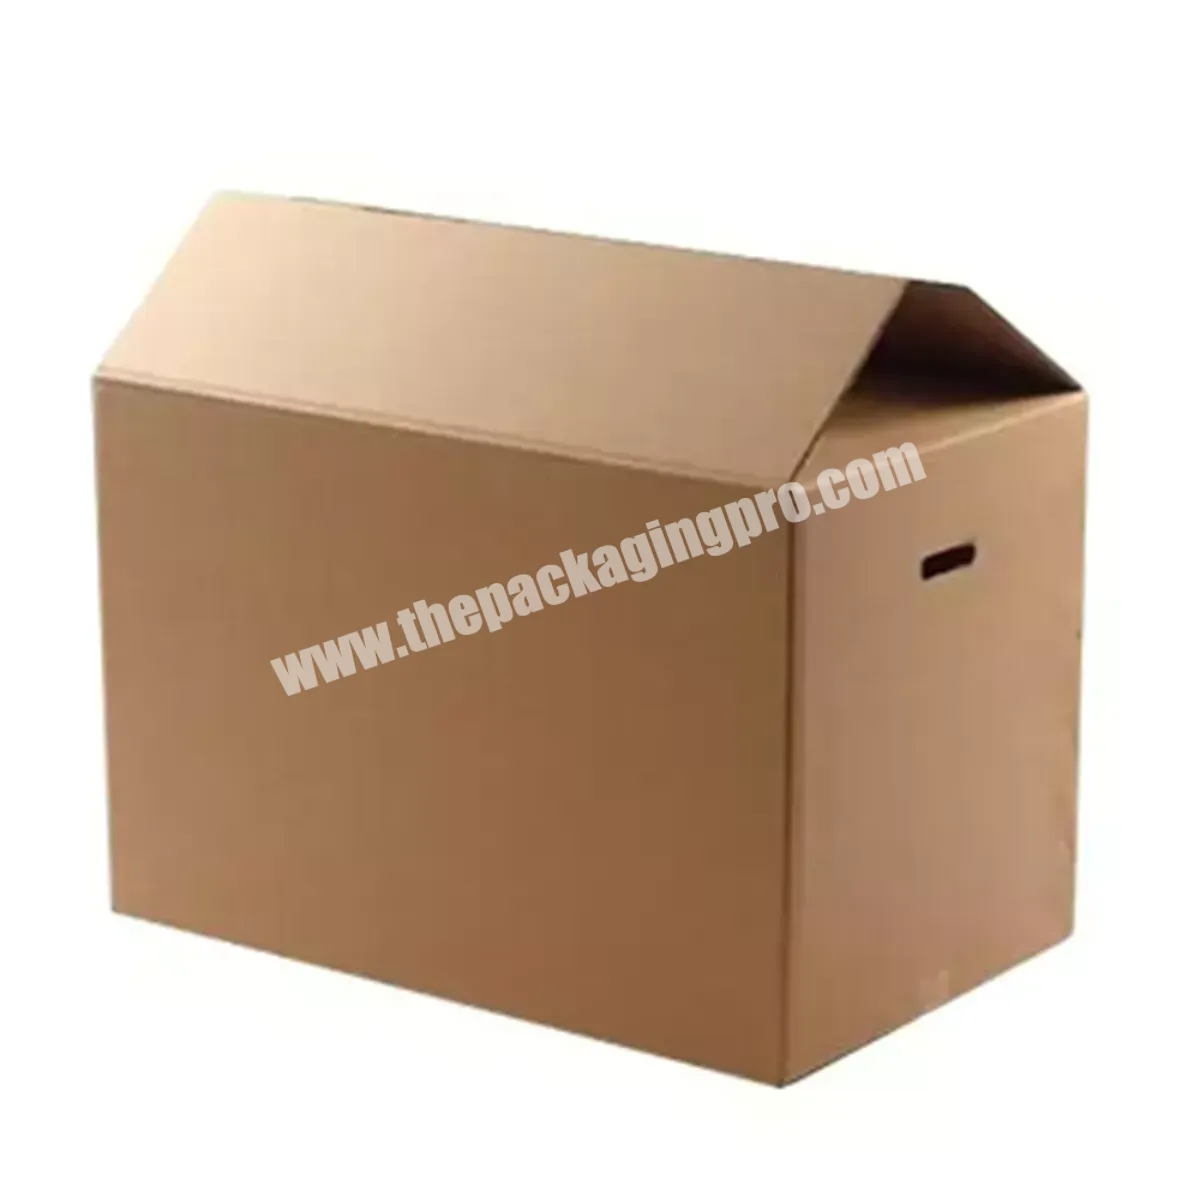 Wholesale Corrugated Mailing Boxes Printed Corrugated Box Corrugated Shipping Packaging Gift Mailer Boxes - Buy Corrugated Box,Printed Corrugated Box,Corrugated Mailing Boxes.